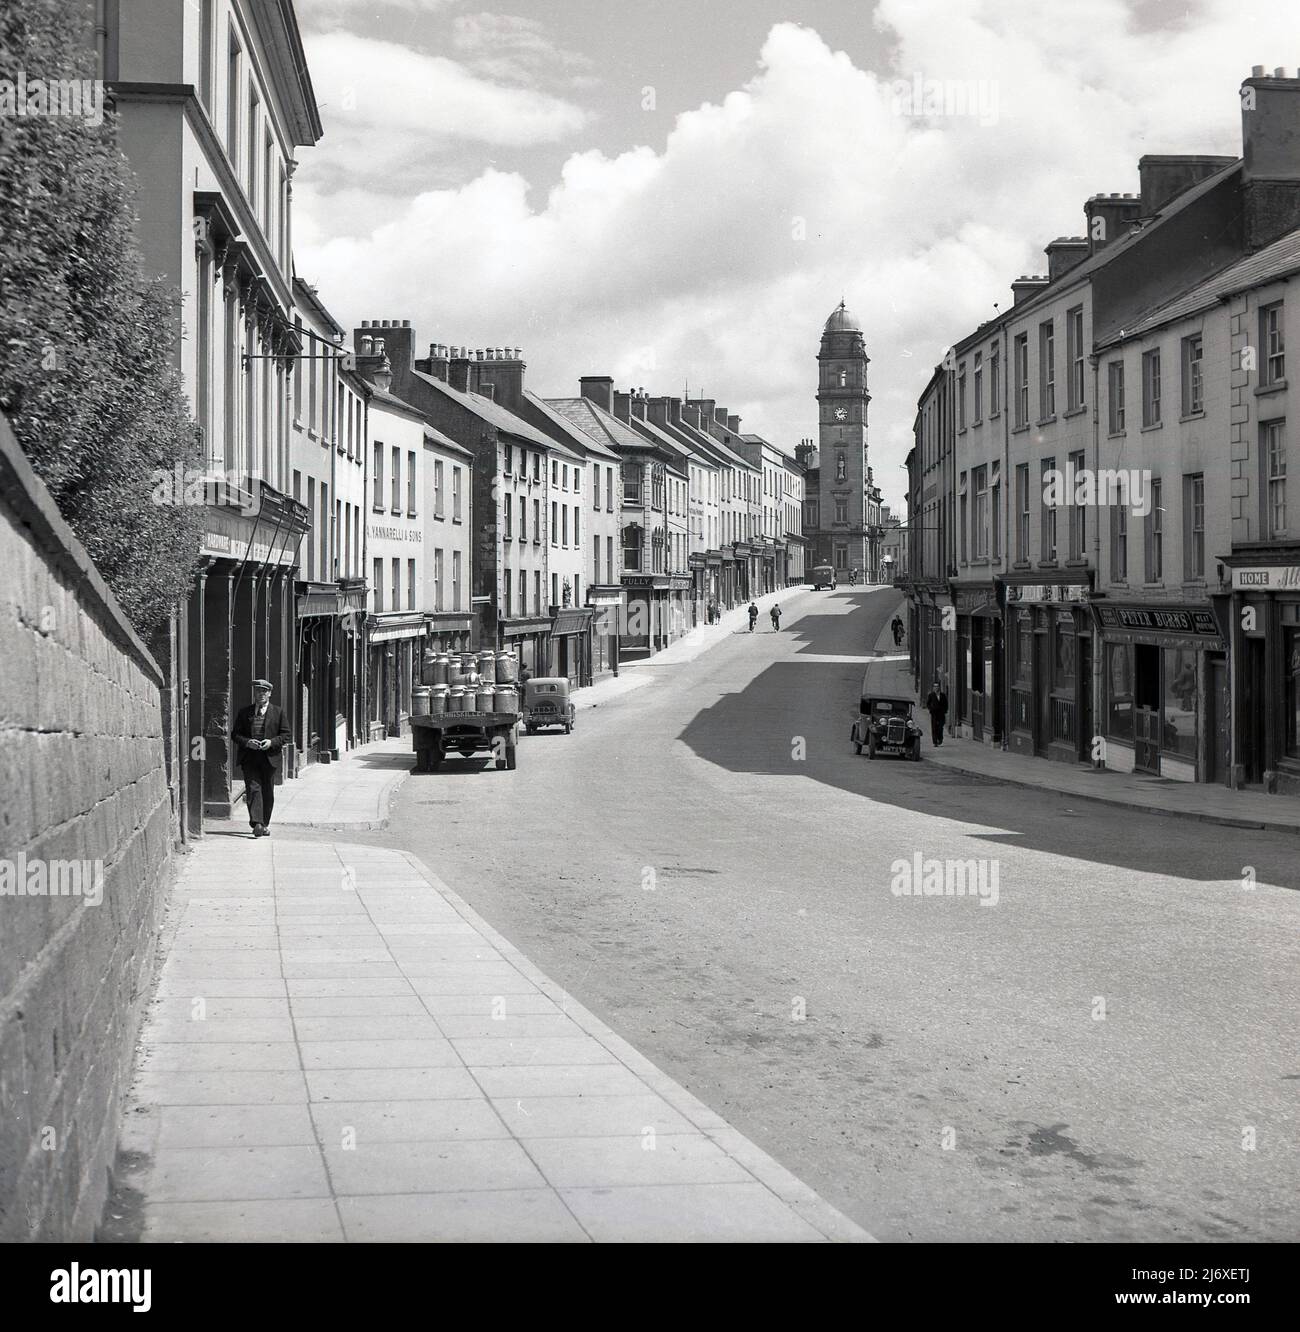 1950s, historical, Enniskillen, Northern Ireland, UK, showing a near deserted high street of with only a couple of locals walking along the pavement.  An open back truck with milk urns is parked up. Dating back to 1901, the clock tower of the town hall can be seen at the far end of the street. Names on stores include, a bar, William Blake; and a butcher and meat purveyor Peter Burns. The number plate on one of the cars parked in the deserted street, IL 2202, while on the other side of the street, another car, of an even earlier era is parked and this has the numberplate HMT 275. Stock Photo